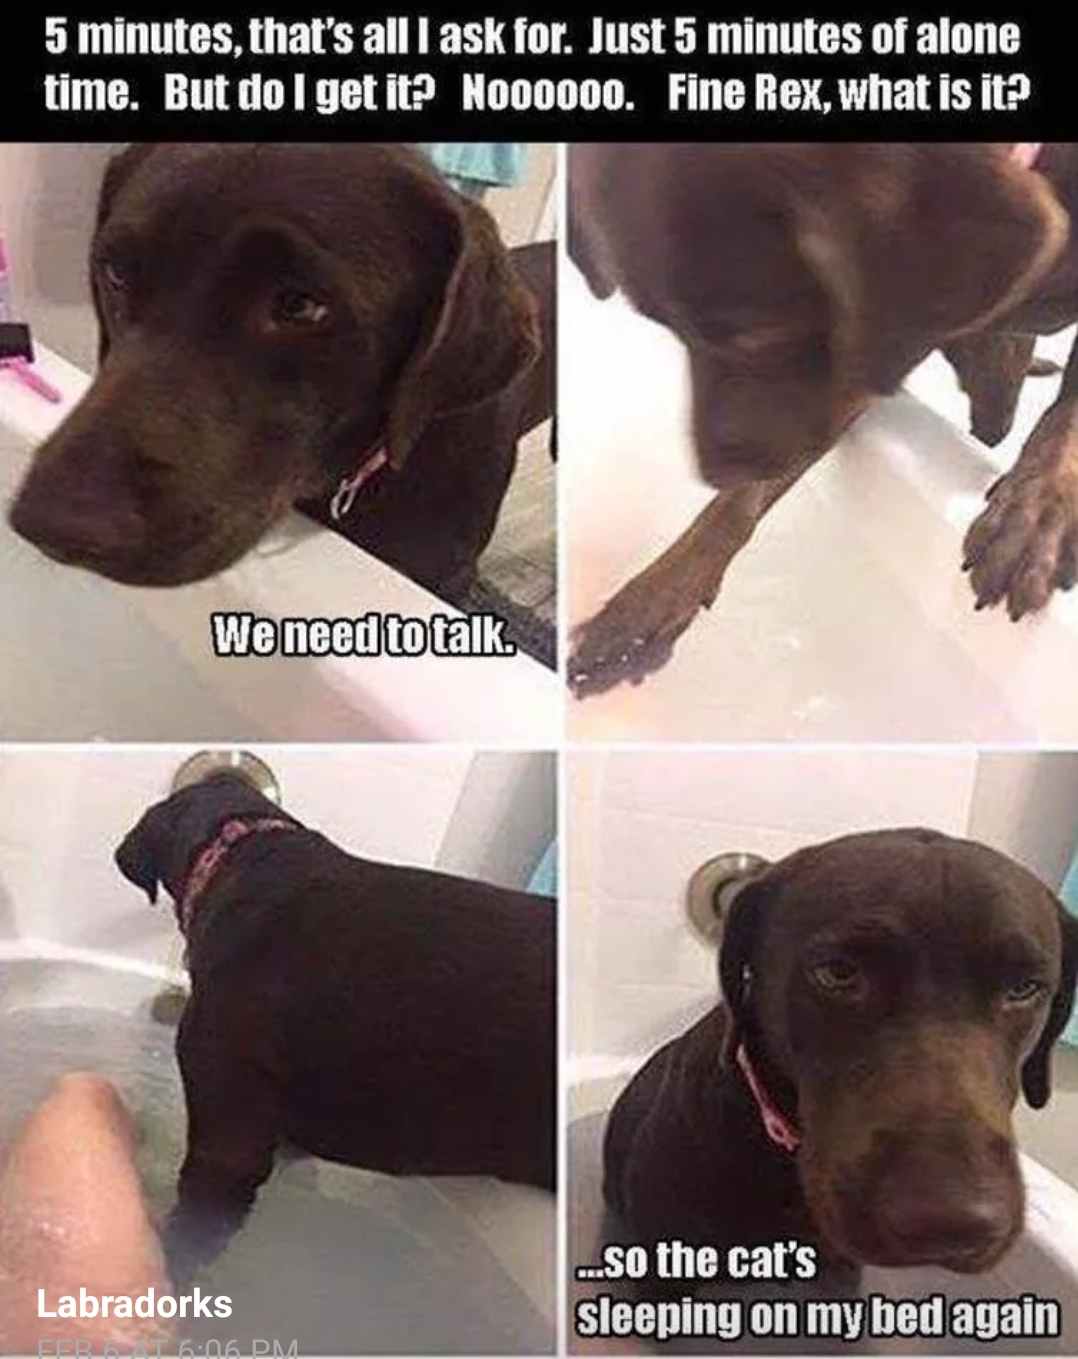 funny memes and pics - dog in tub meme - 5 minutes, that's all I ask for. Just 5 minutes of alone time. But do I get it? Noooooo. Fine Rex, what is it? We need to talk. Labradorks 506 Dm ...so the cat's sleeping on my bed again